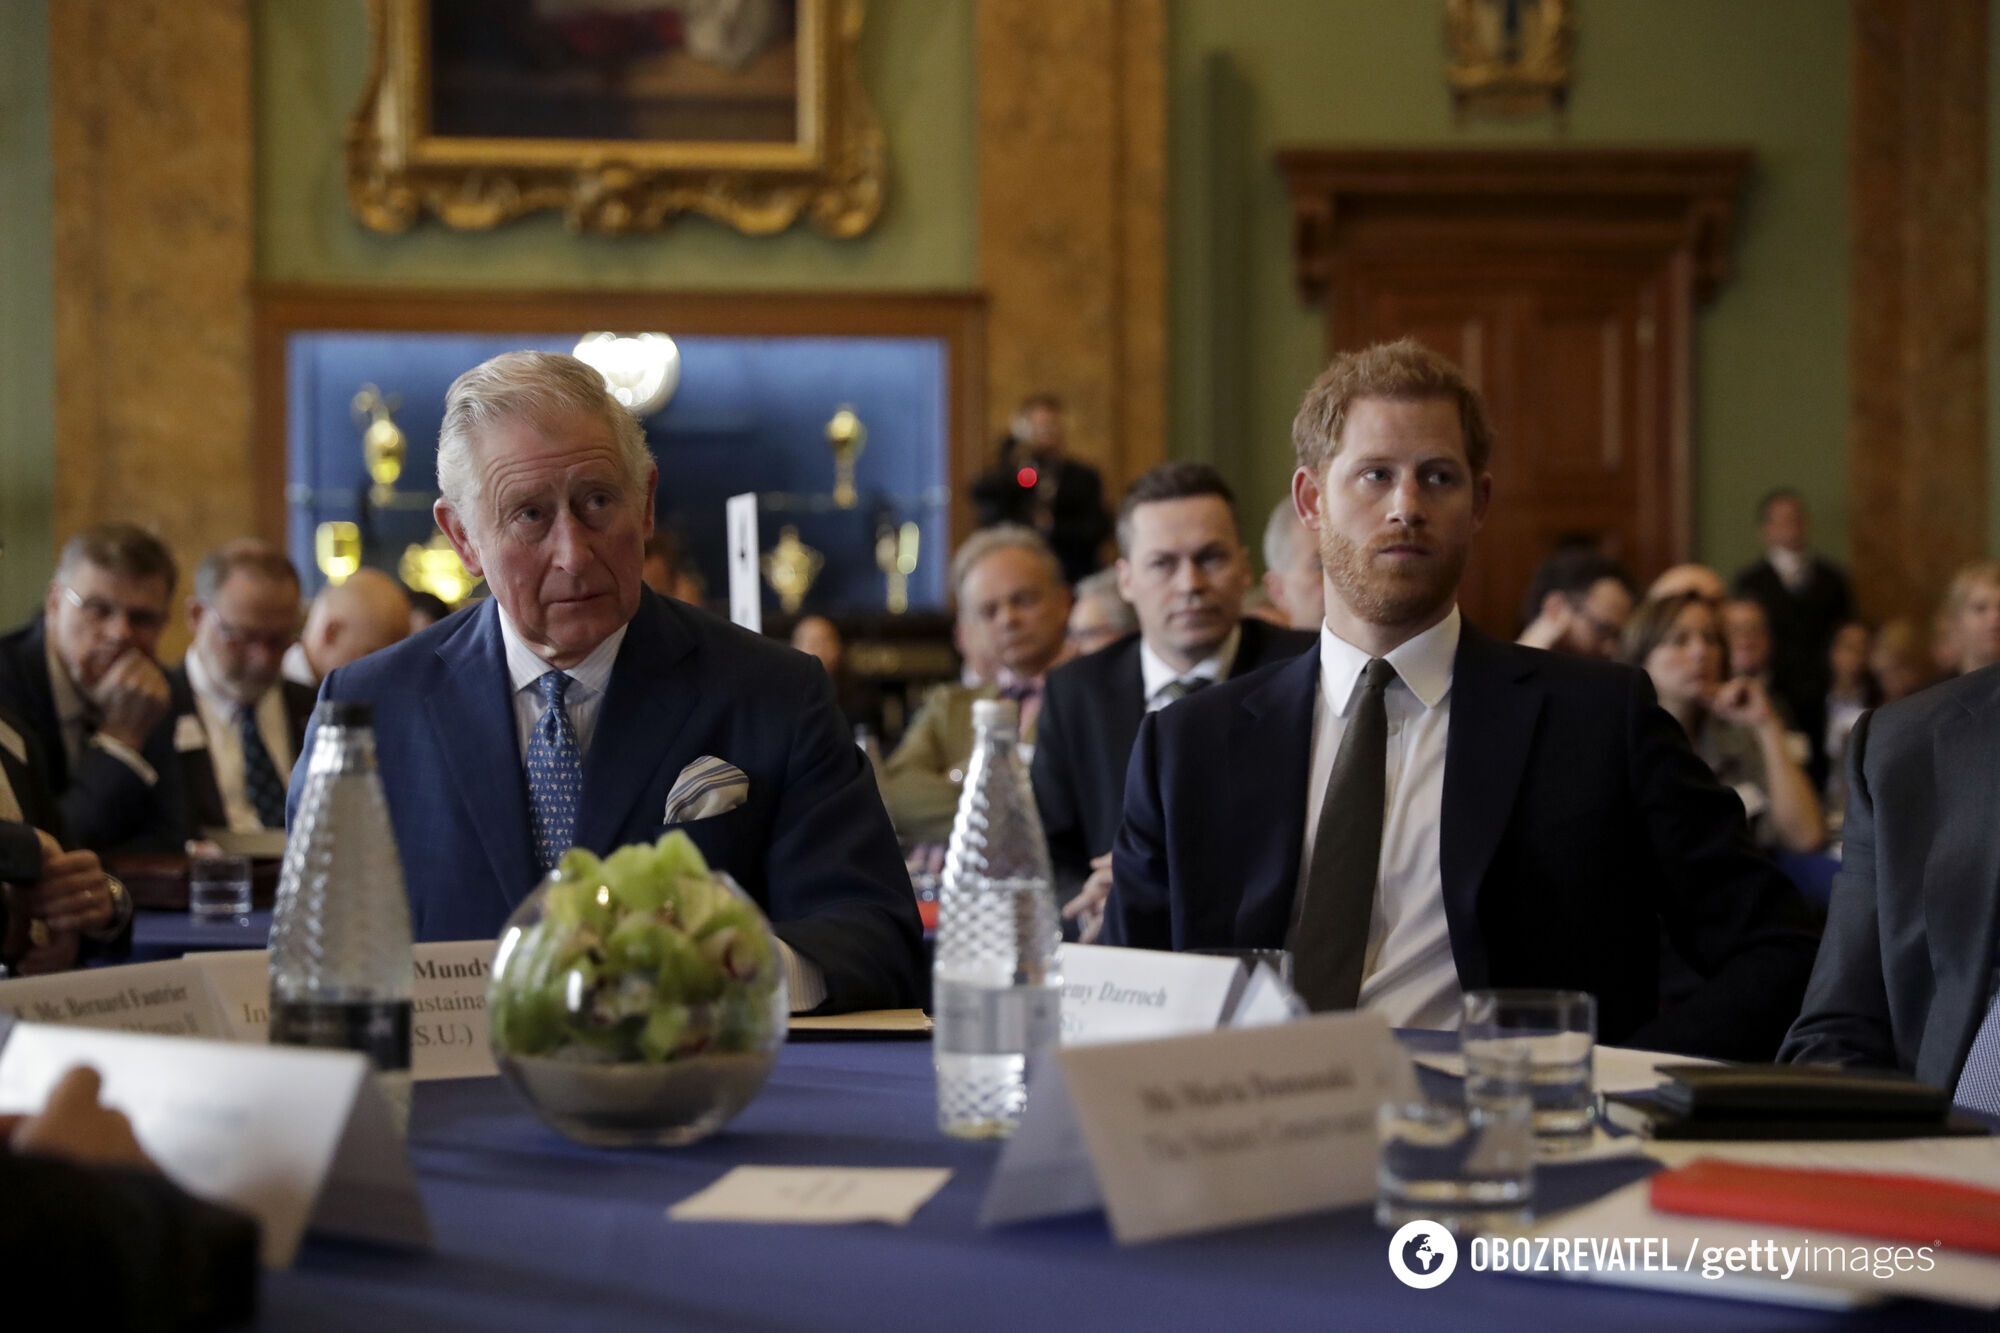 Prince Harry refused to meet with King Charles III in London: what is the real reason